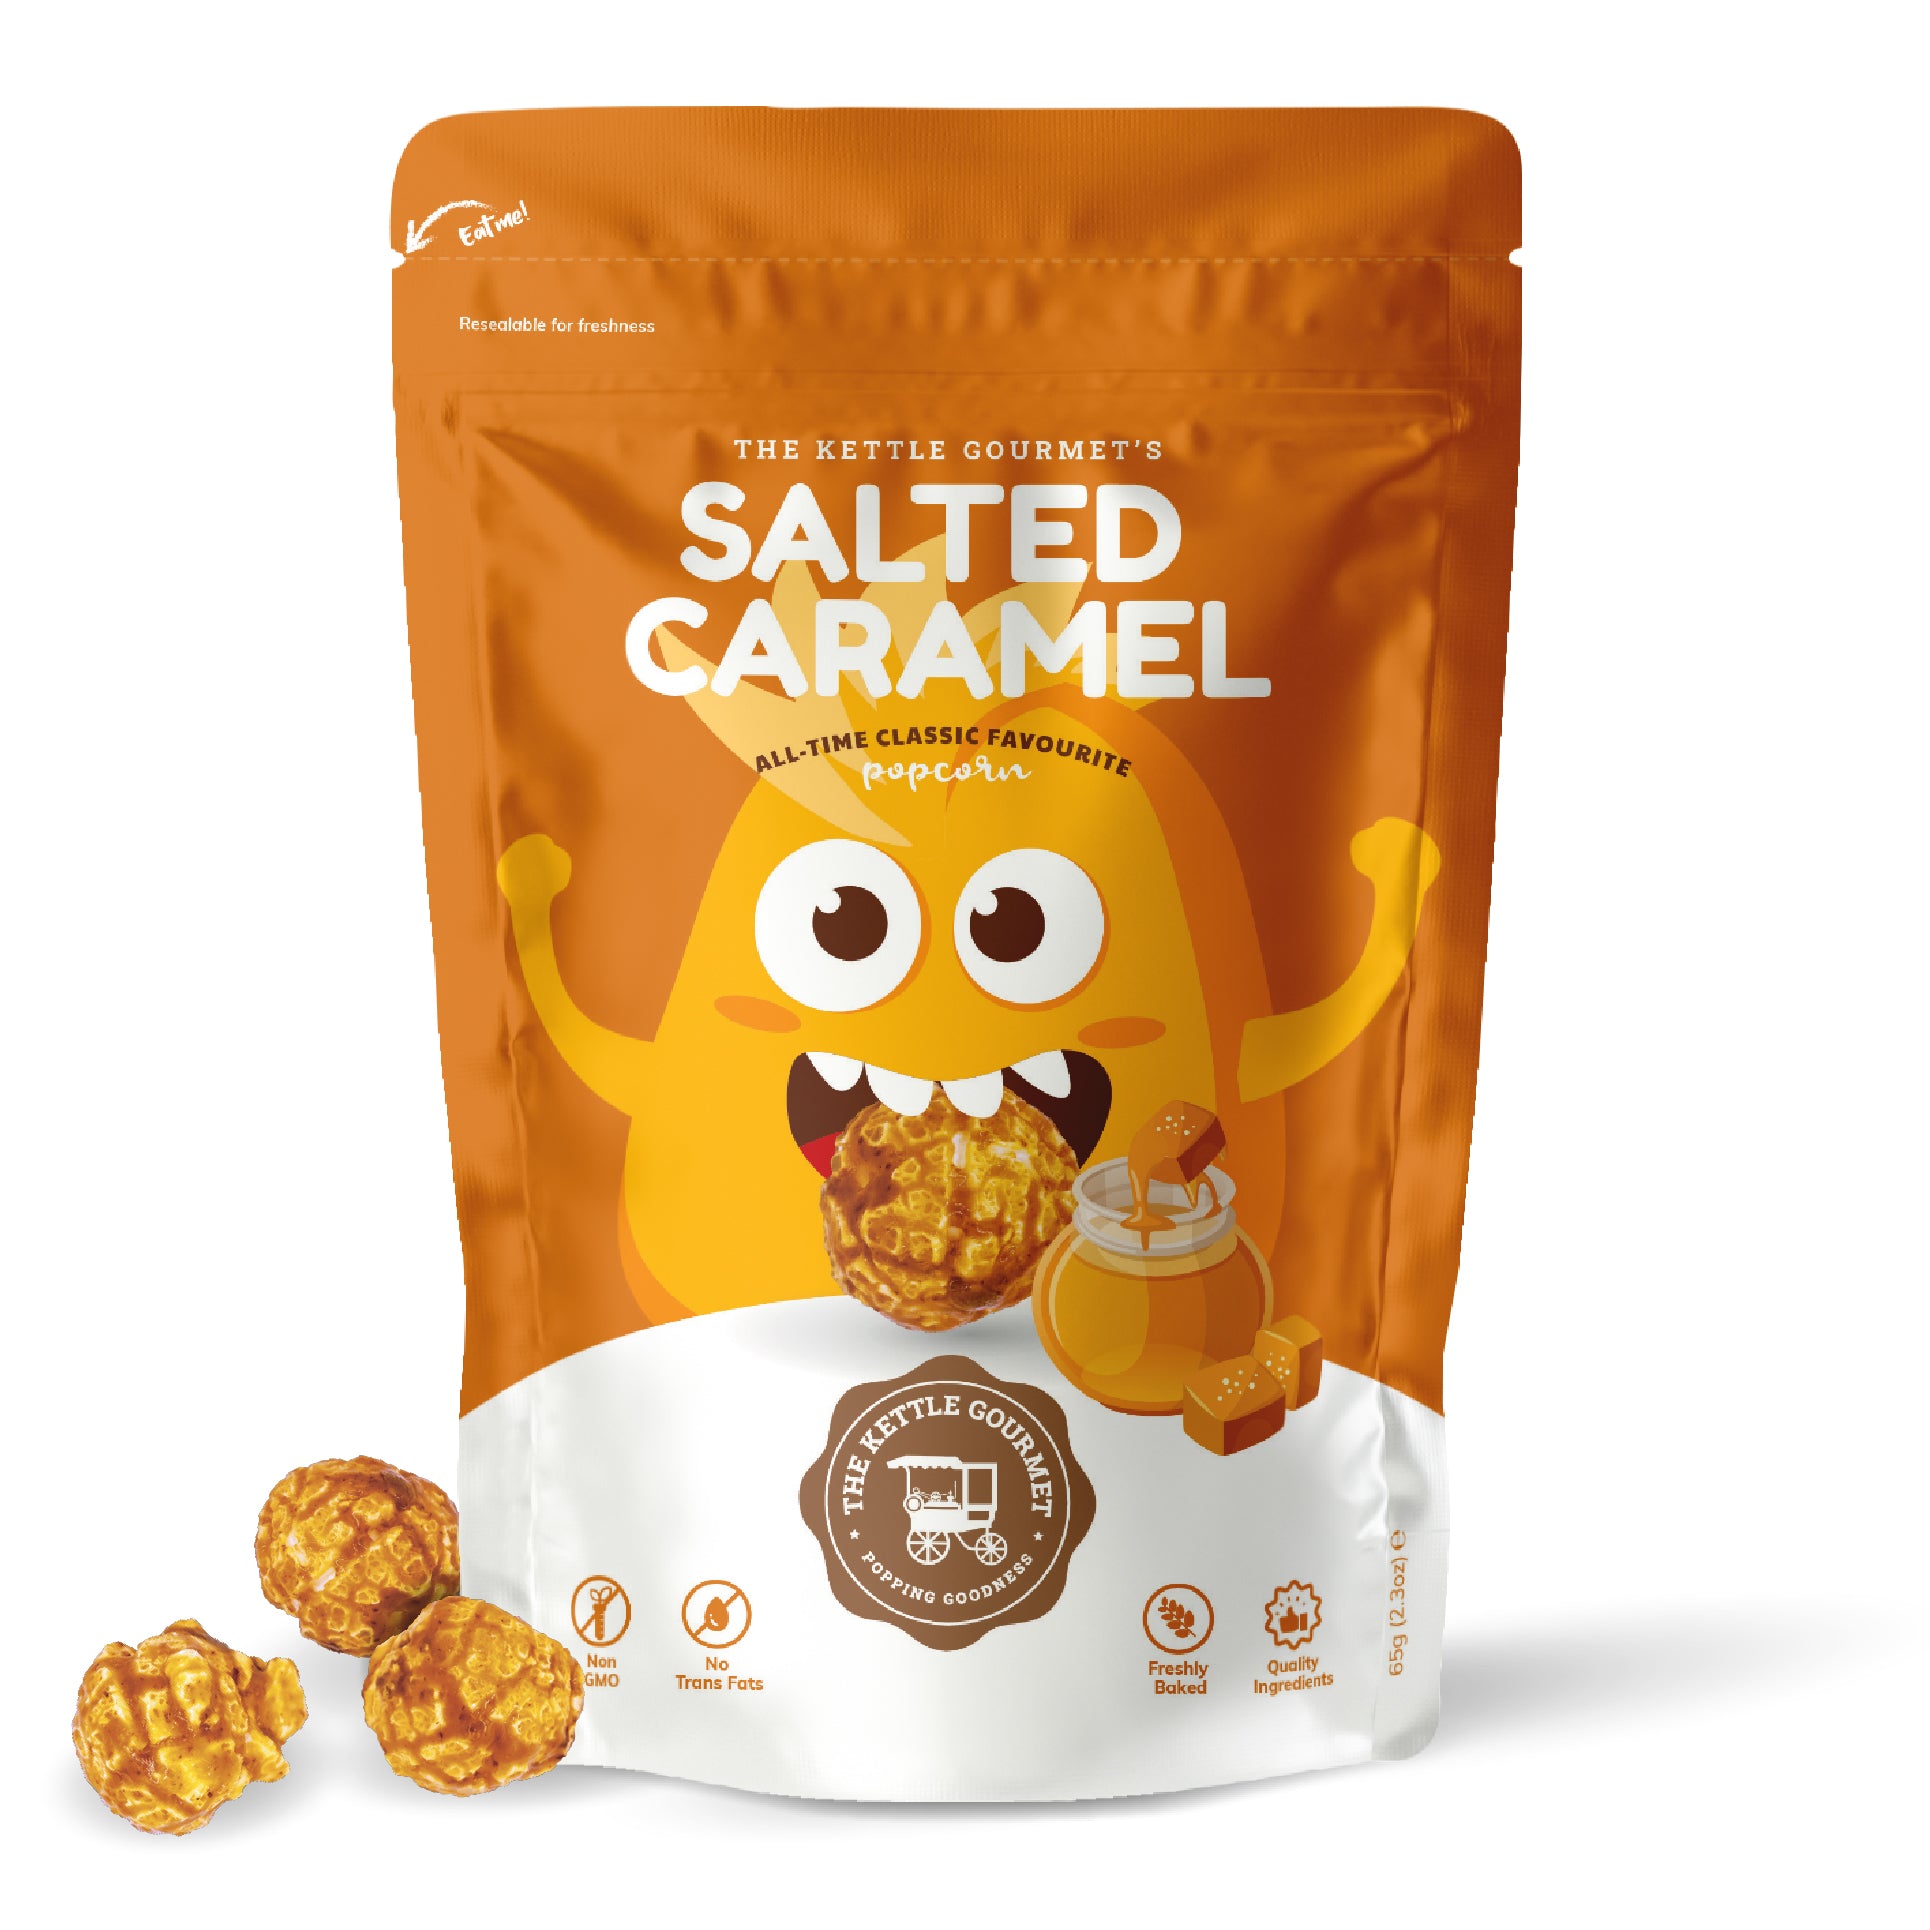 TKG Salted Caramel (All-time Classic Favourite Popcorn)